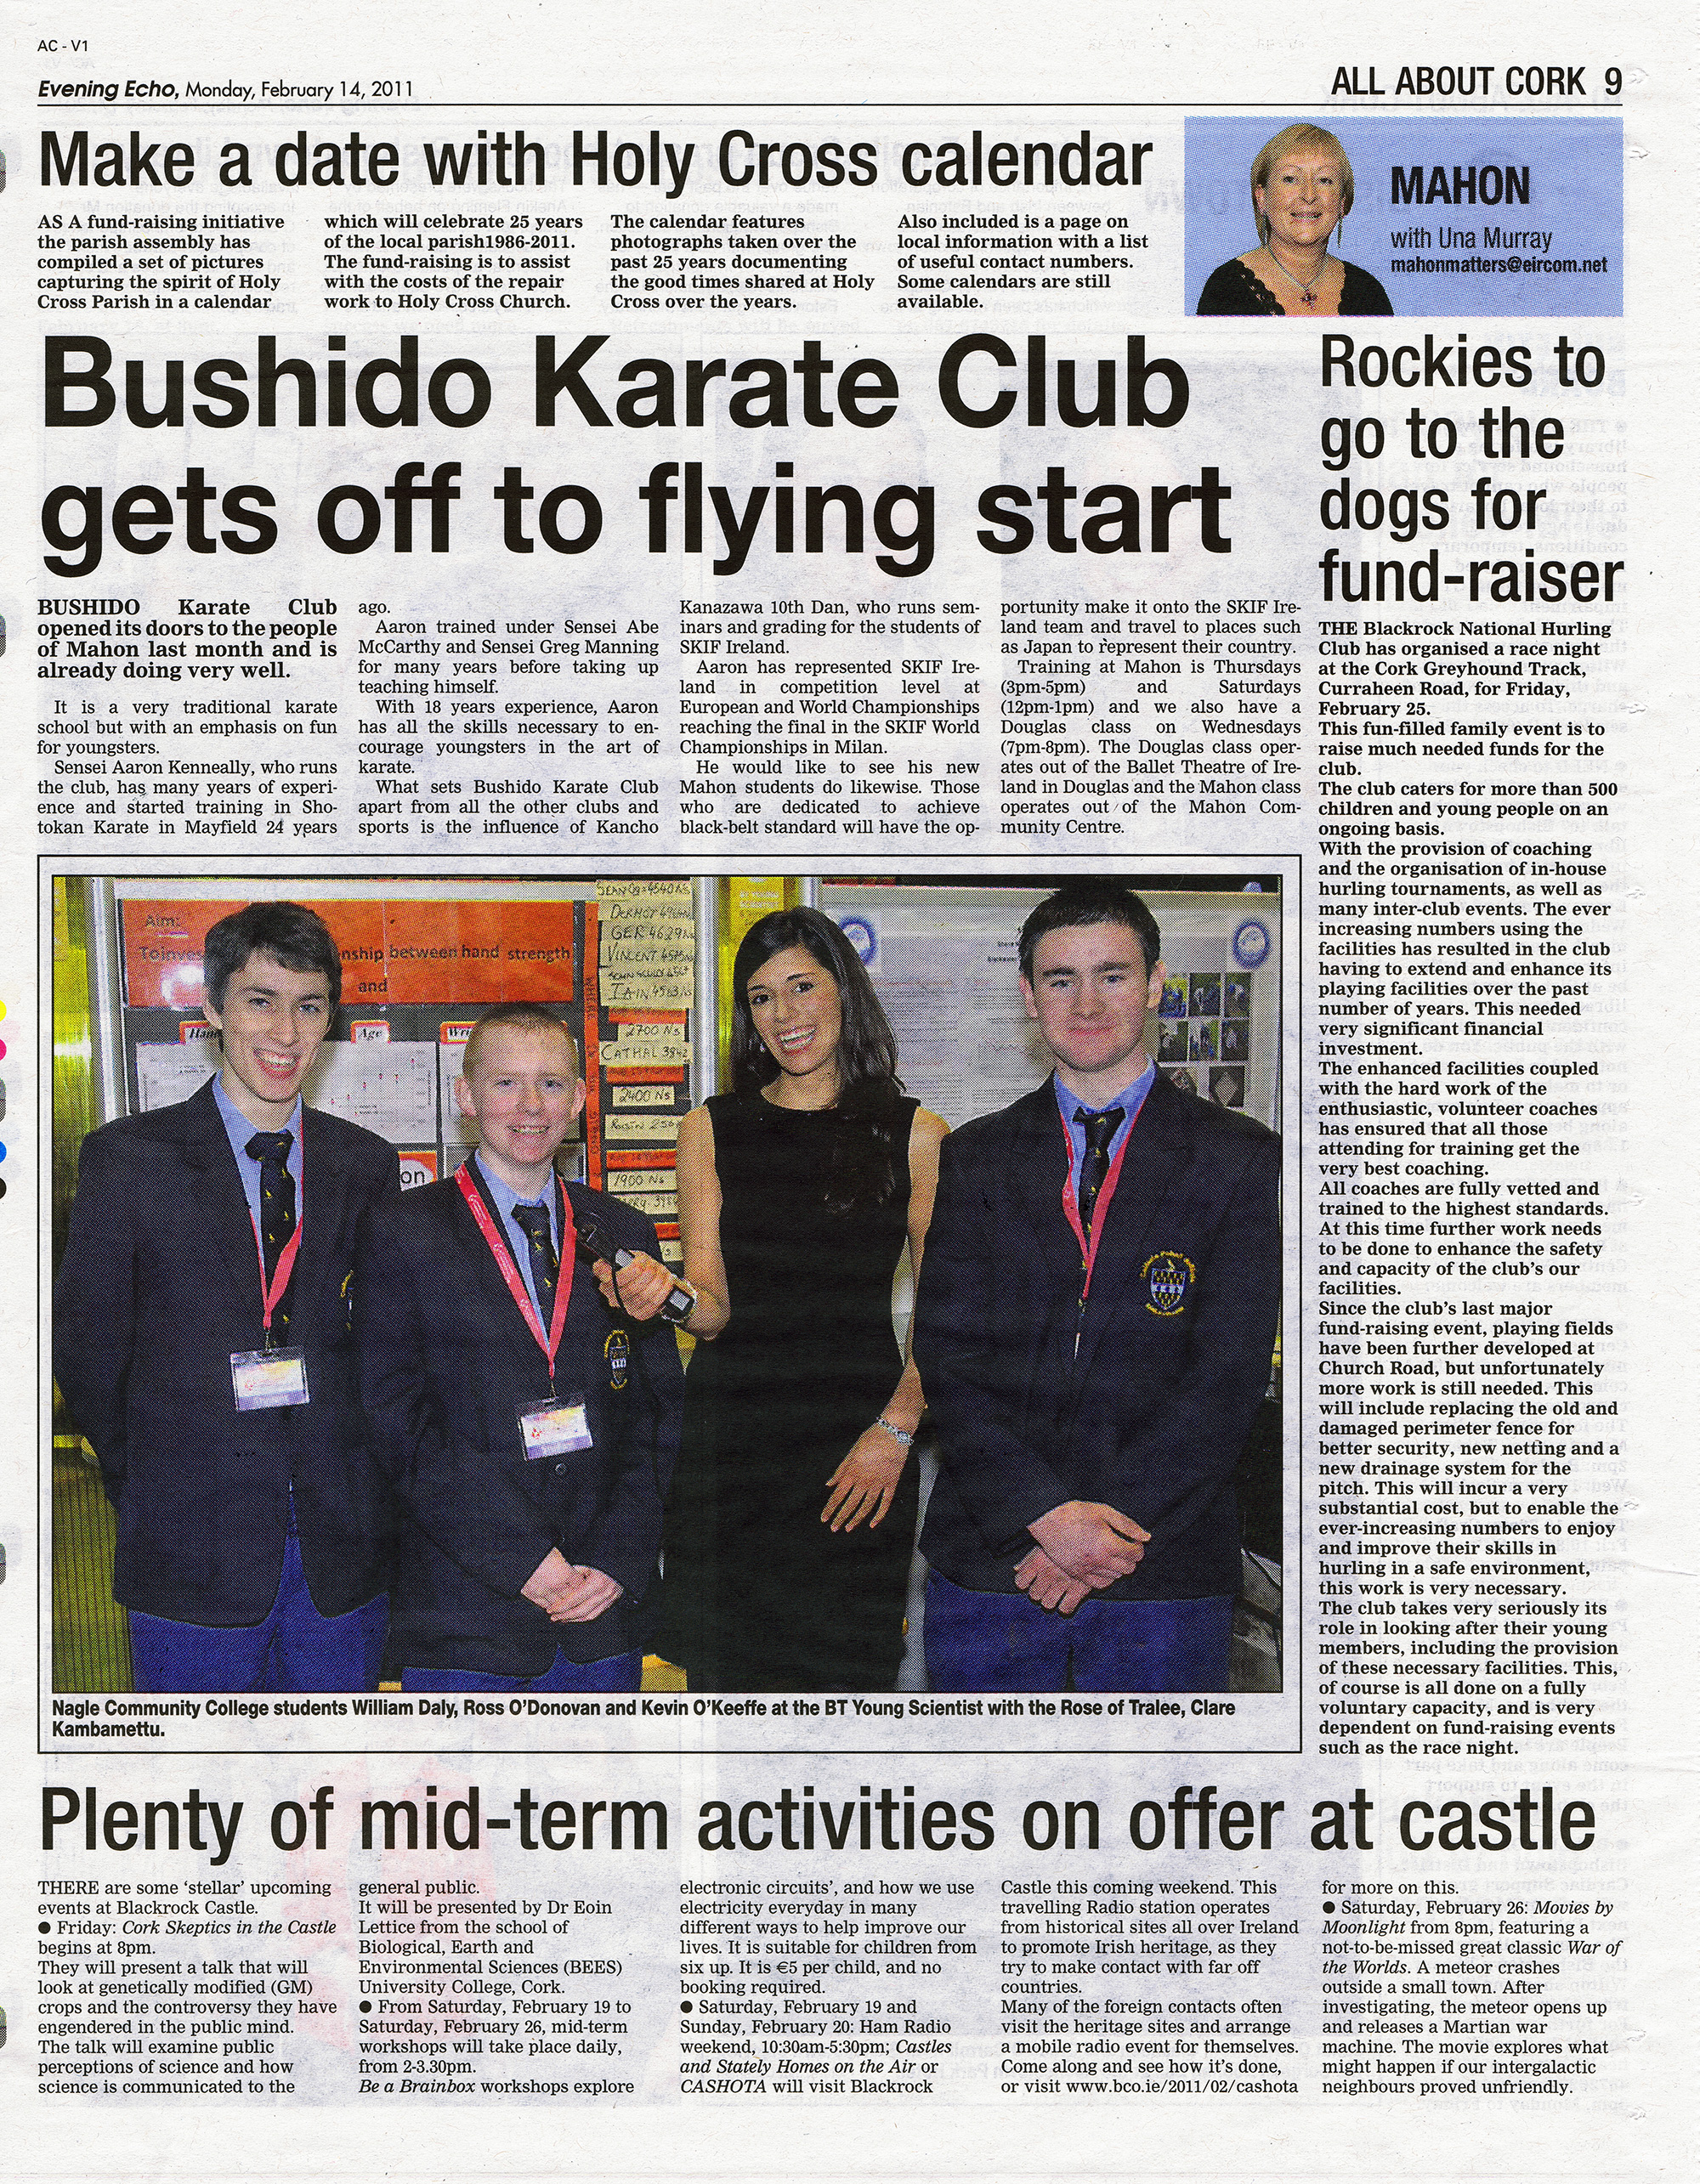 Evening Echo Feature - Bushido Karate Club gets off to flying start